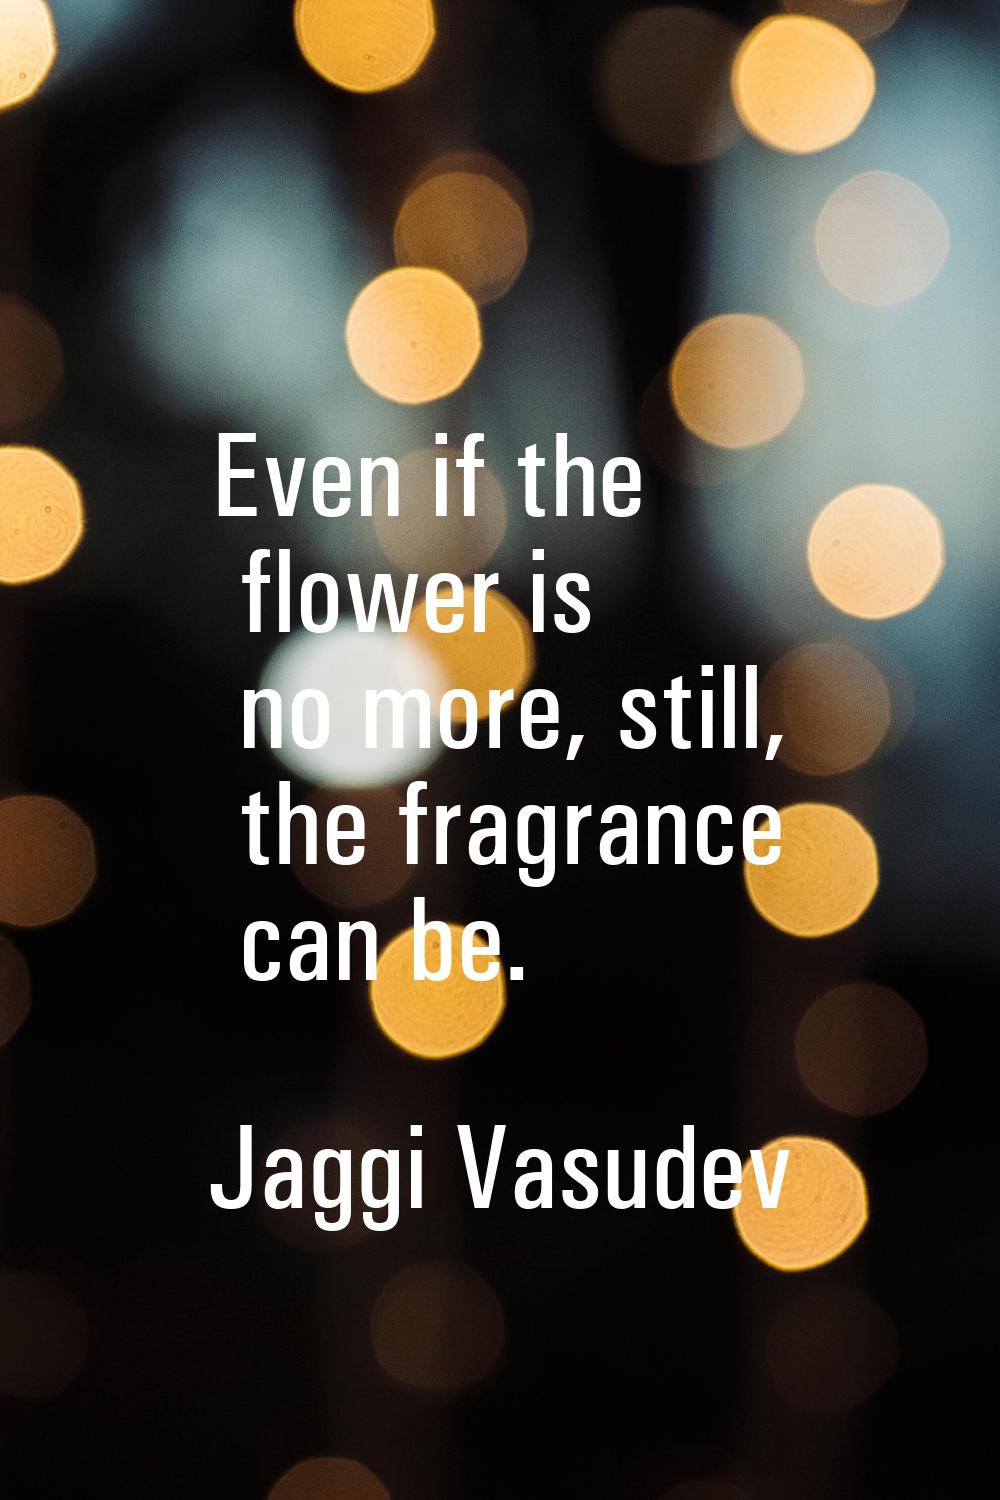 Even if the flower is no more, still, the fragrance can be.